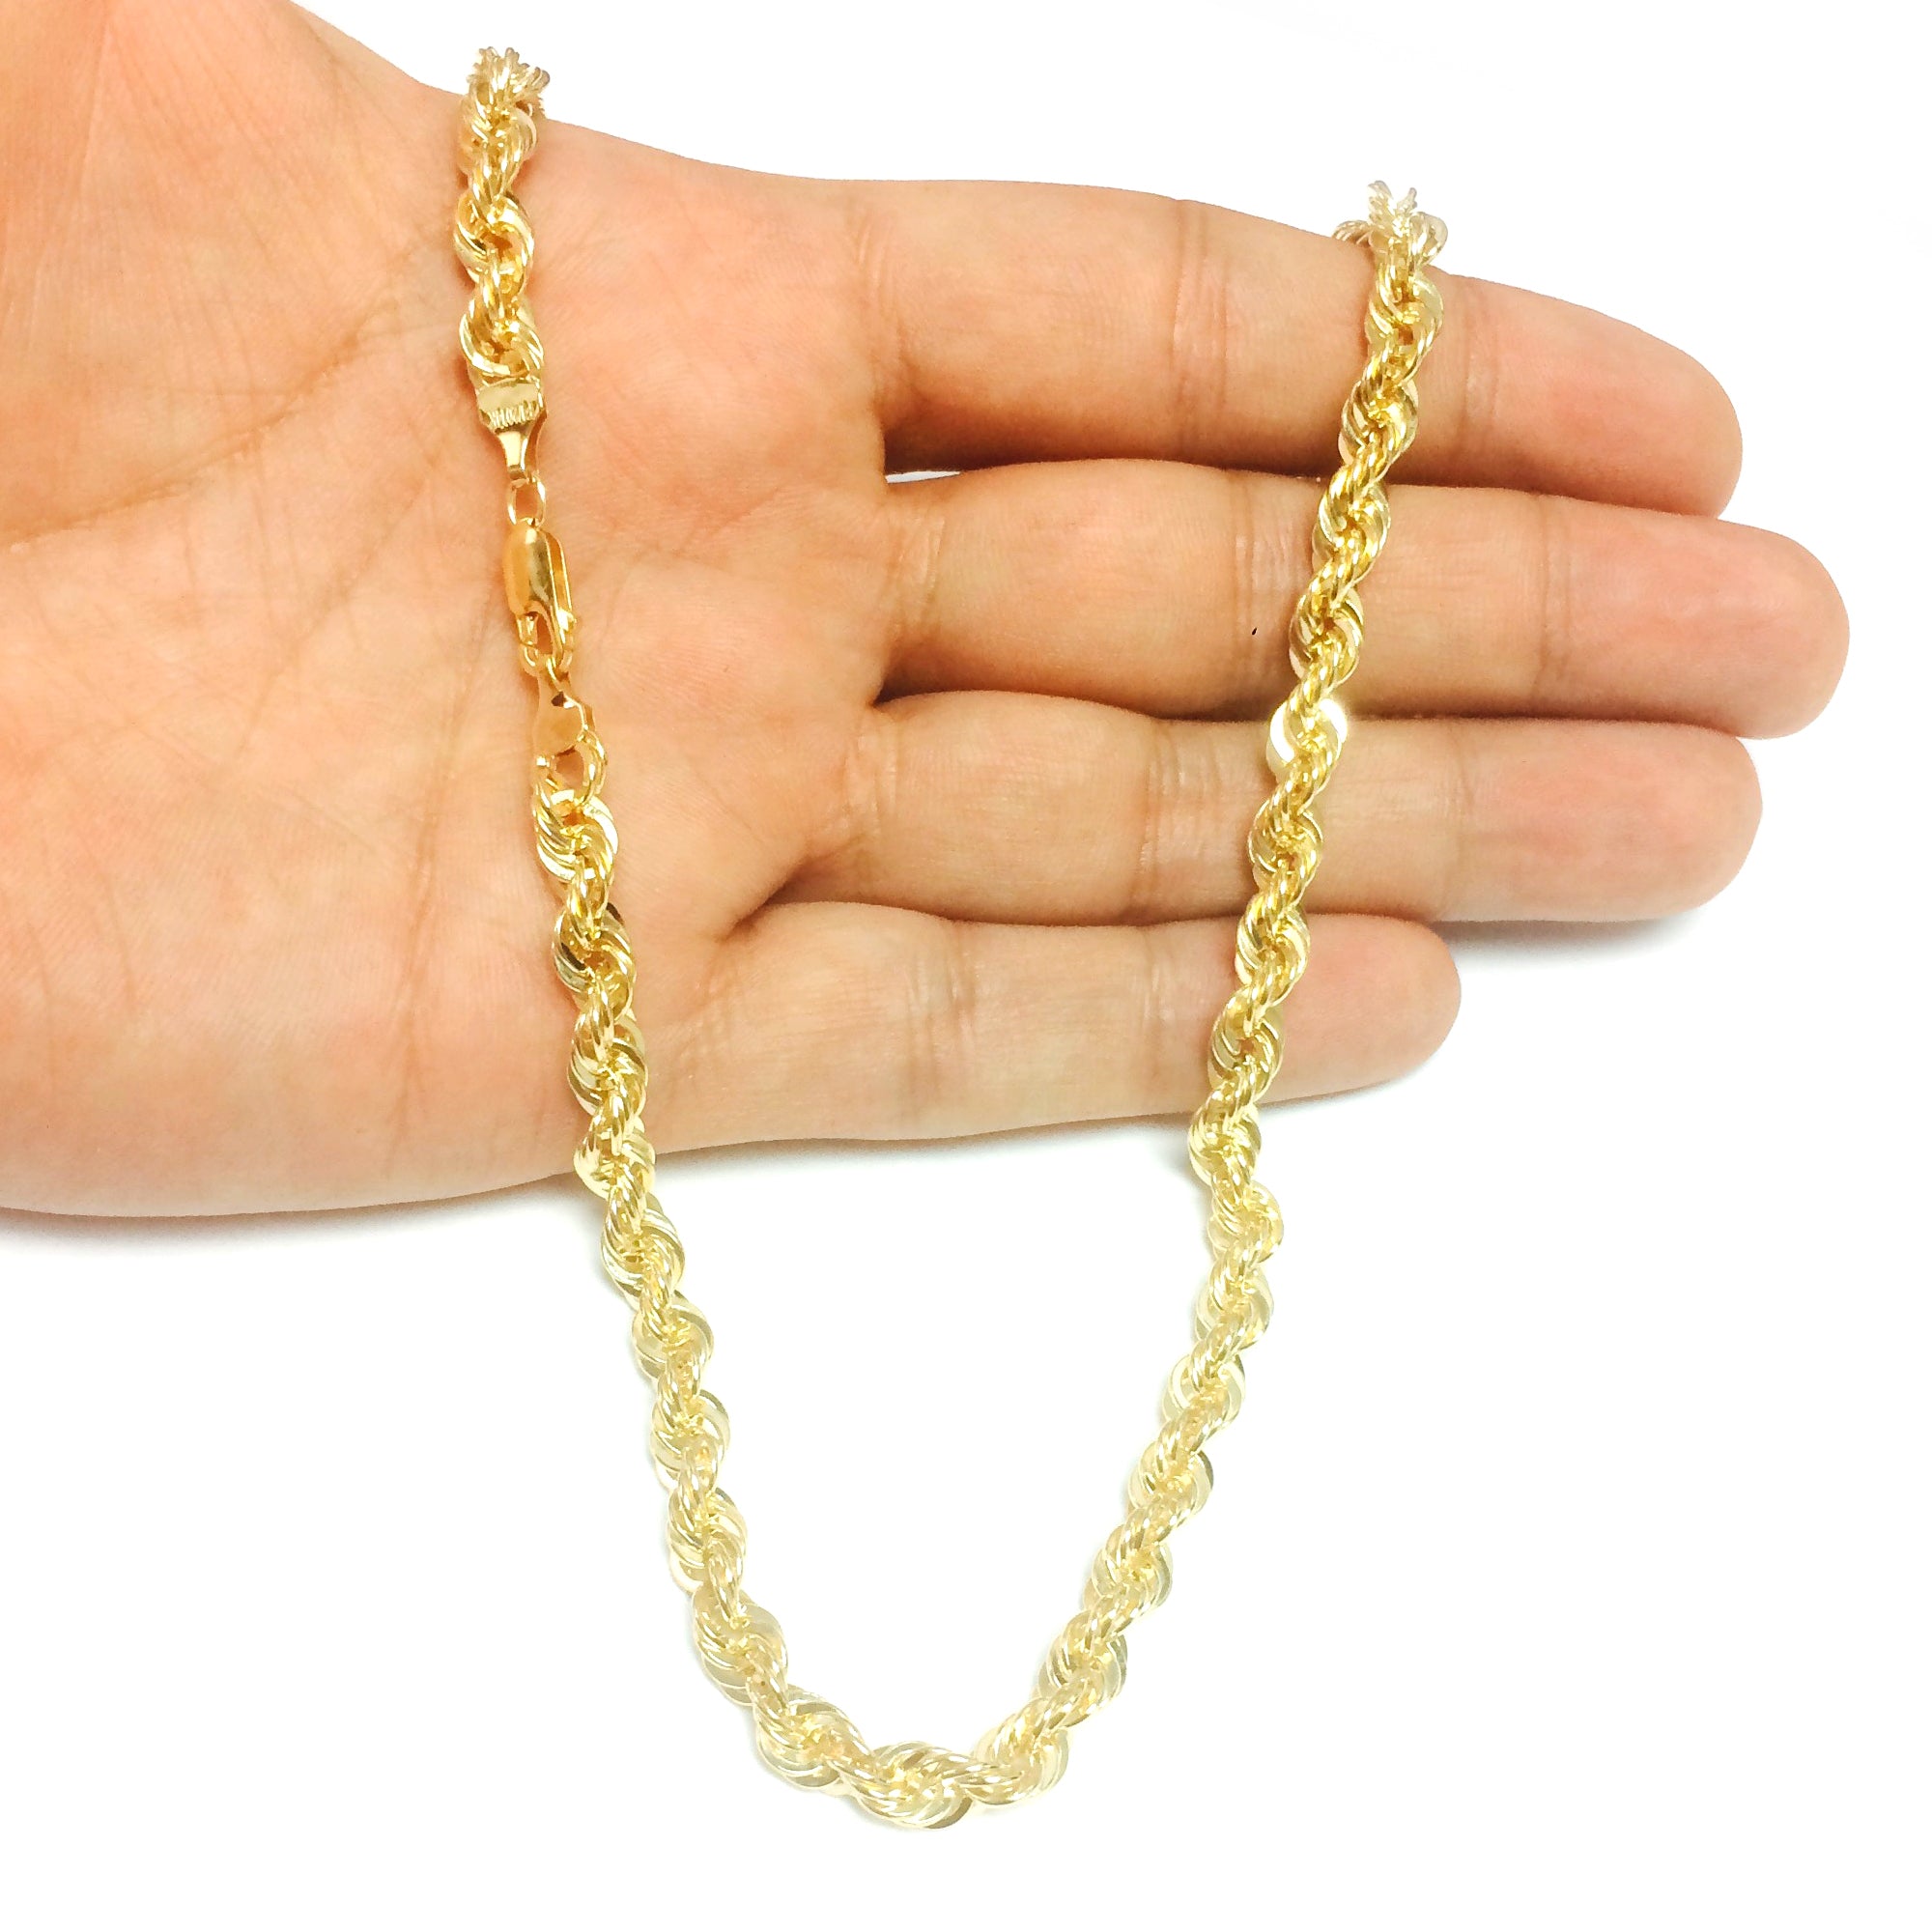 14K Yellow Gold Filled Solid Rope Chain Necklace, 6.0mm Wide fine designer jewelry for men and women